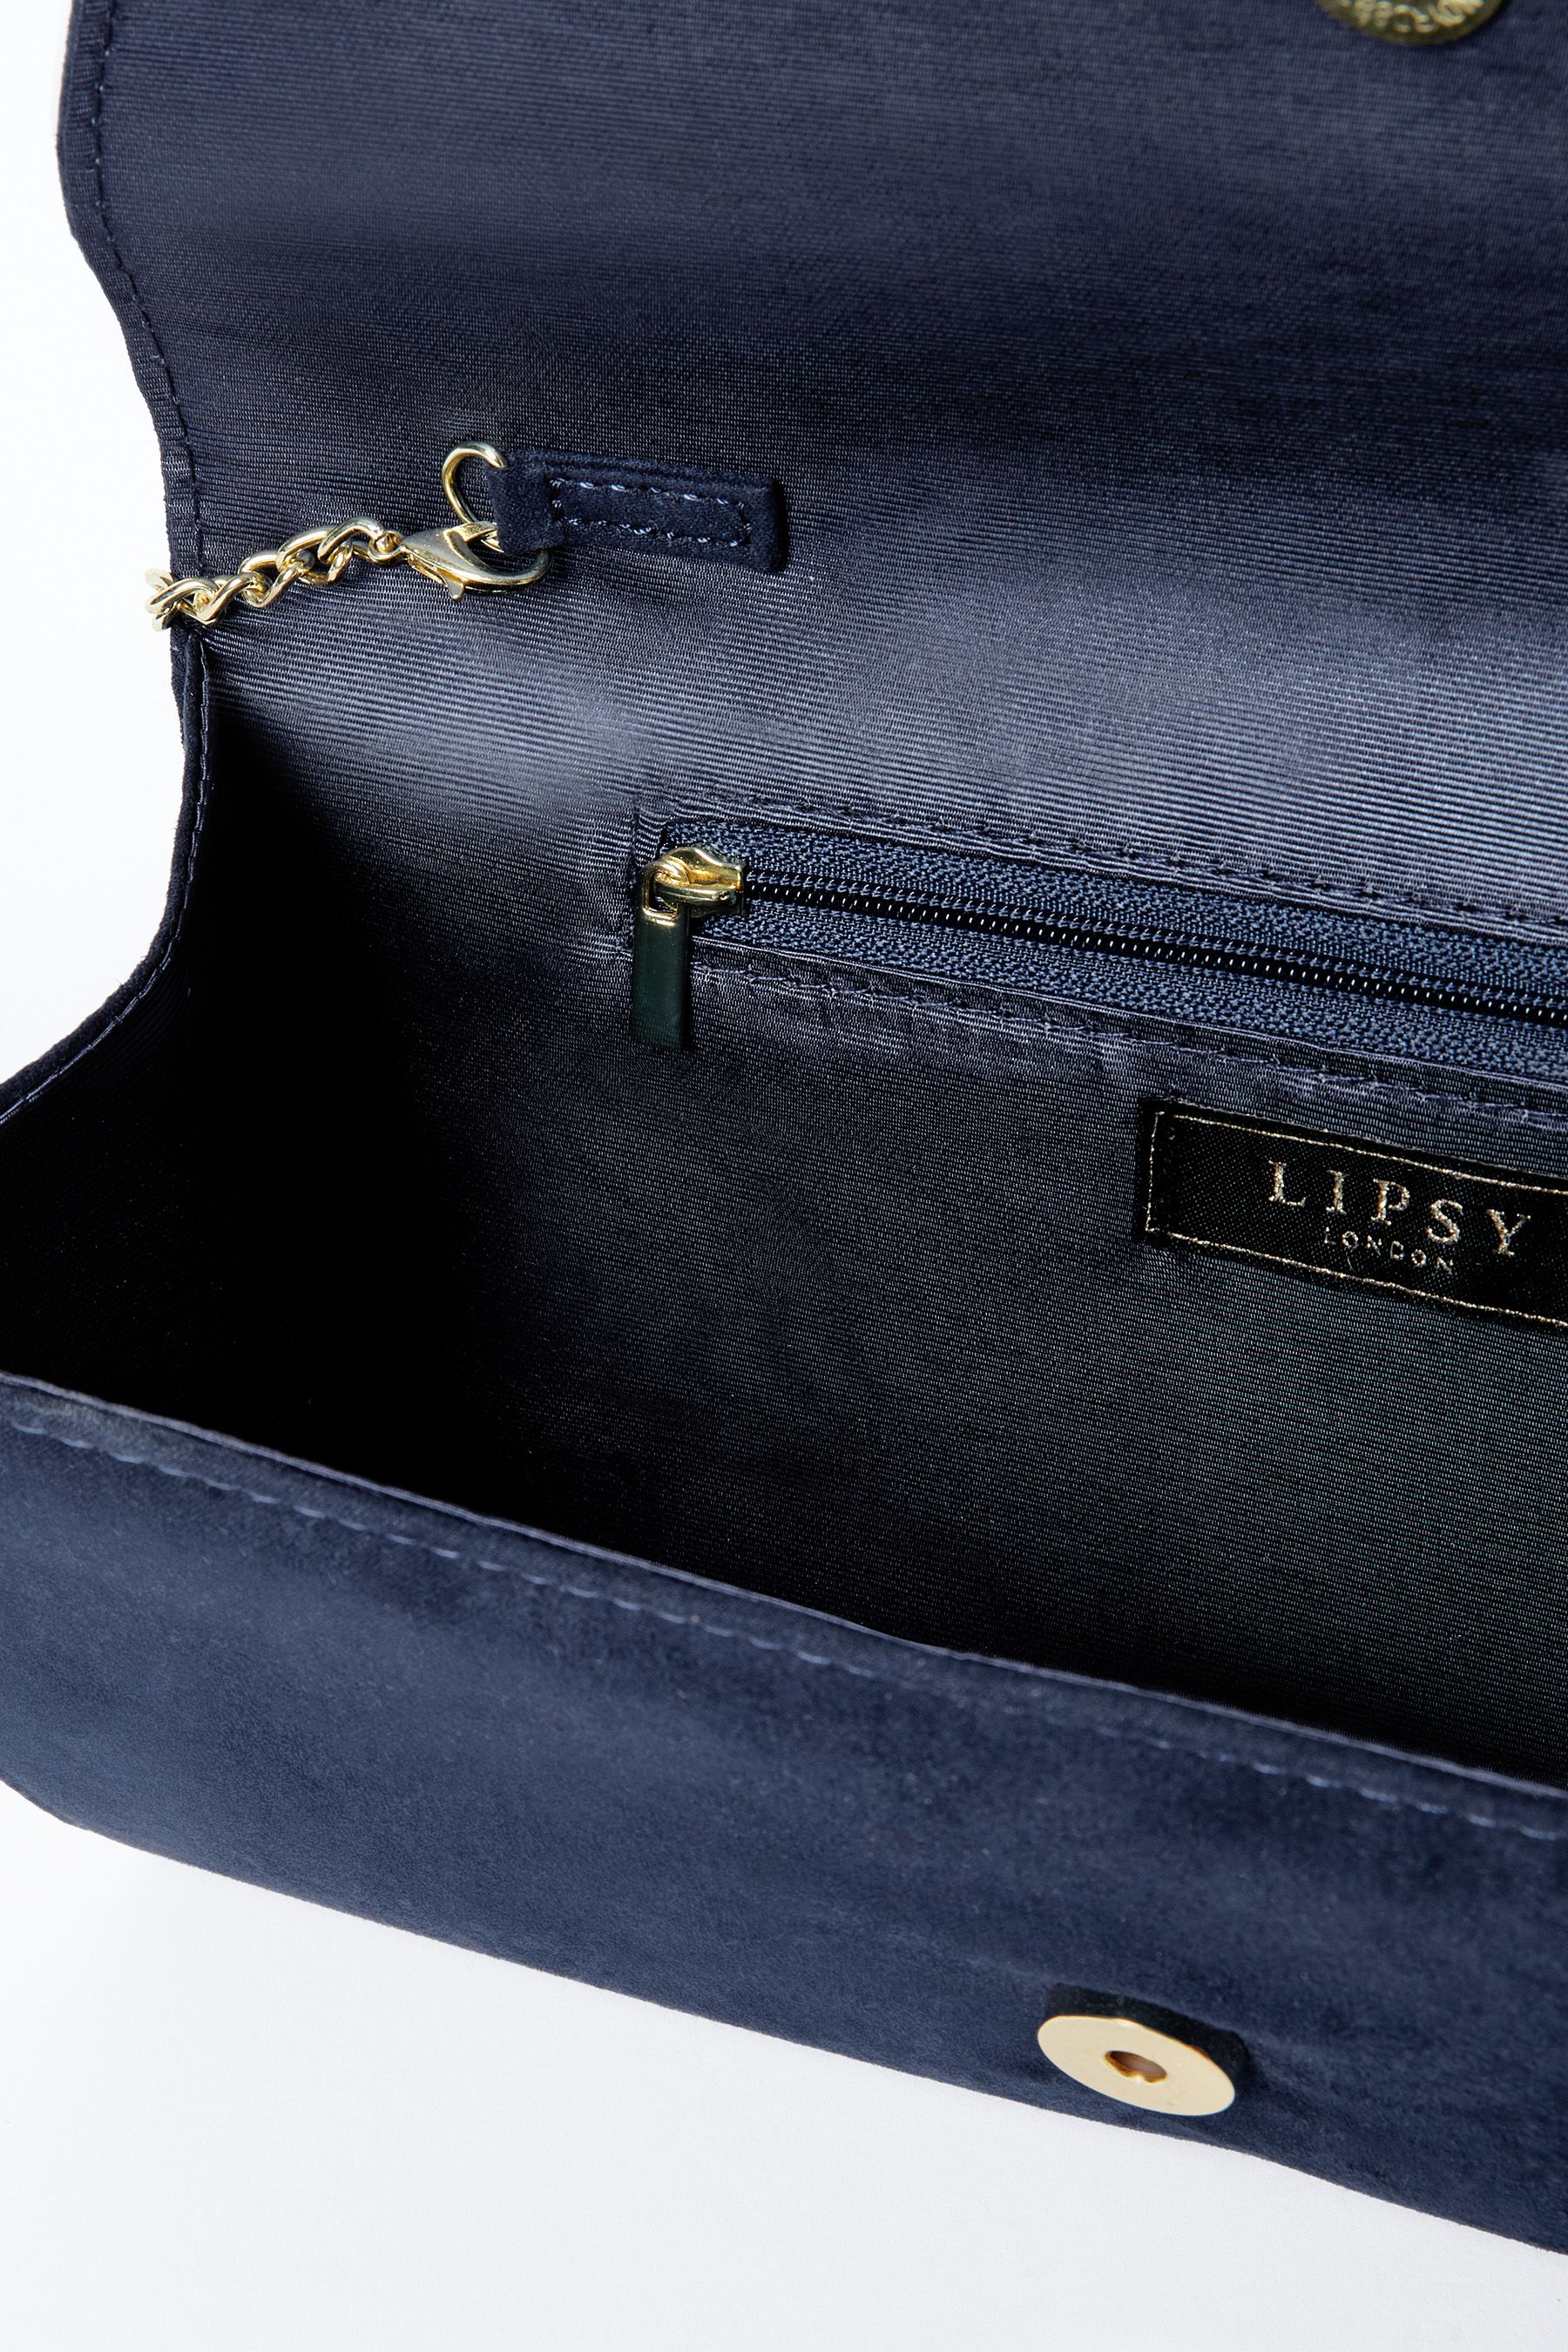 Buy Lipsy Navy Envelope Clutch Occasion Bag from the Next UK online shop